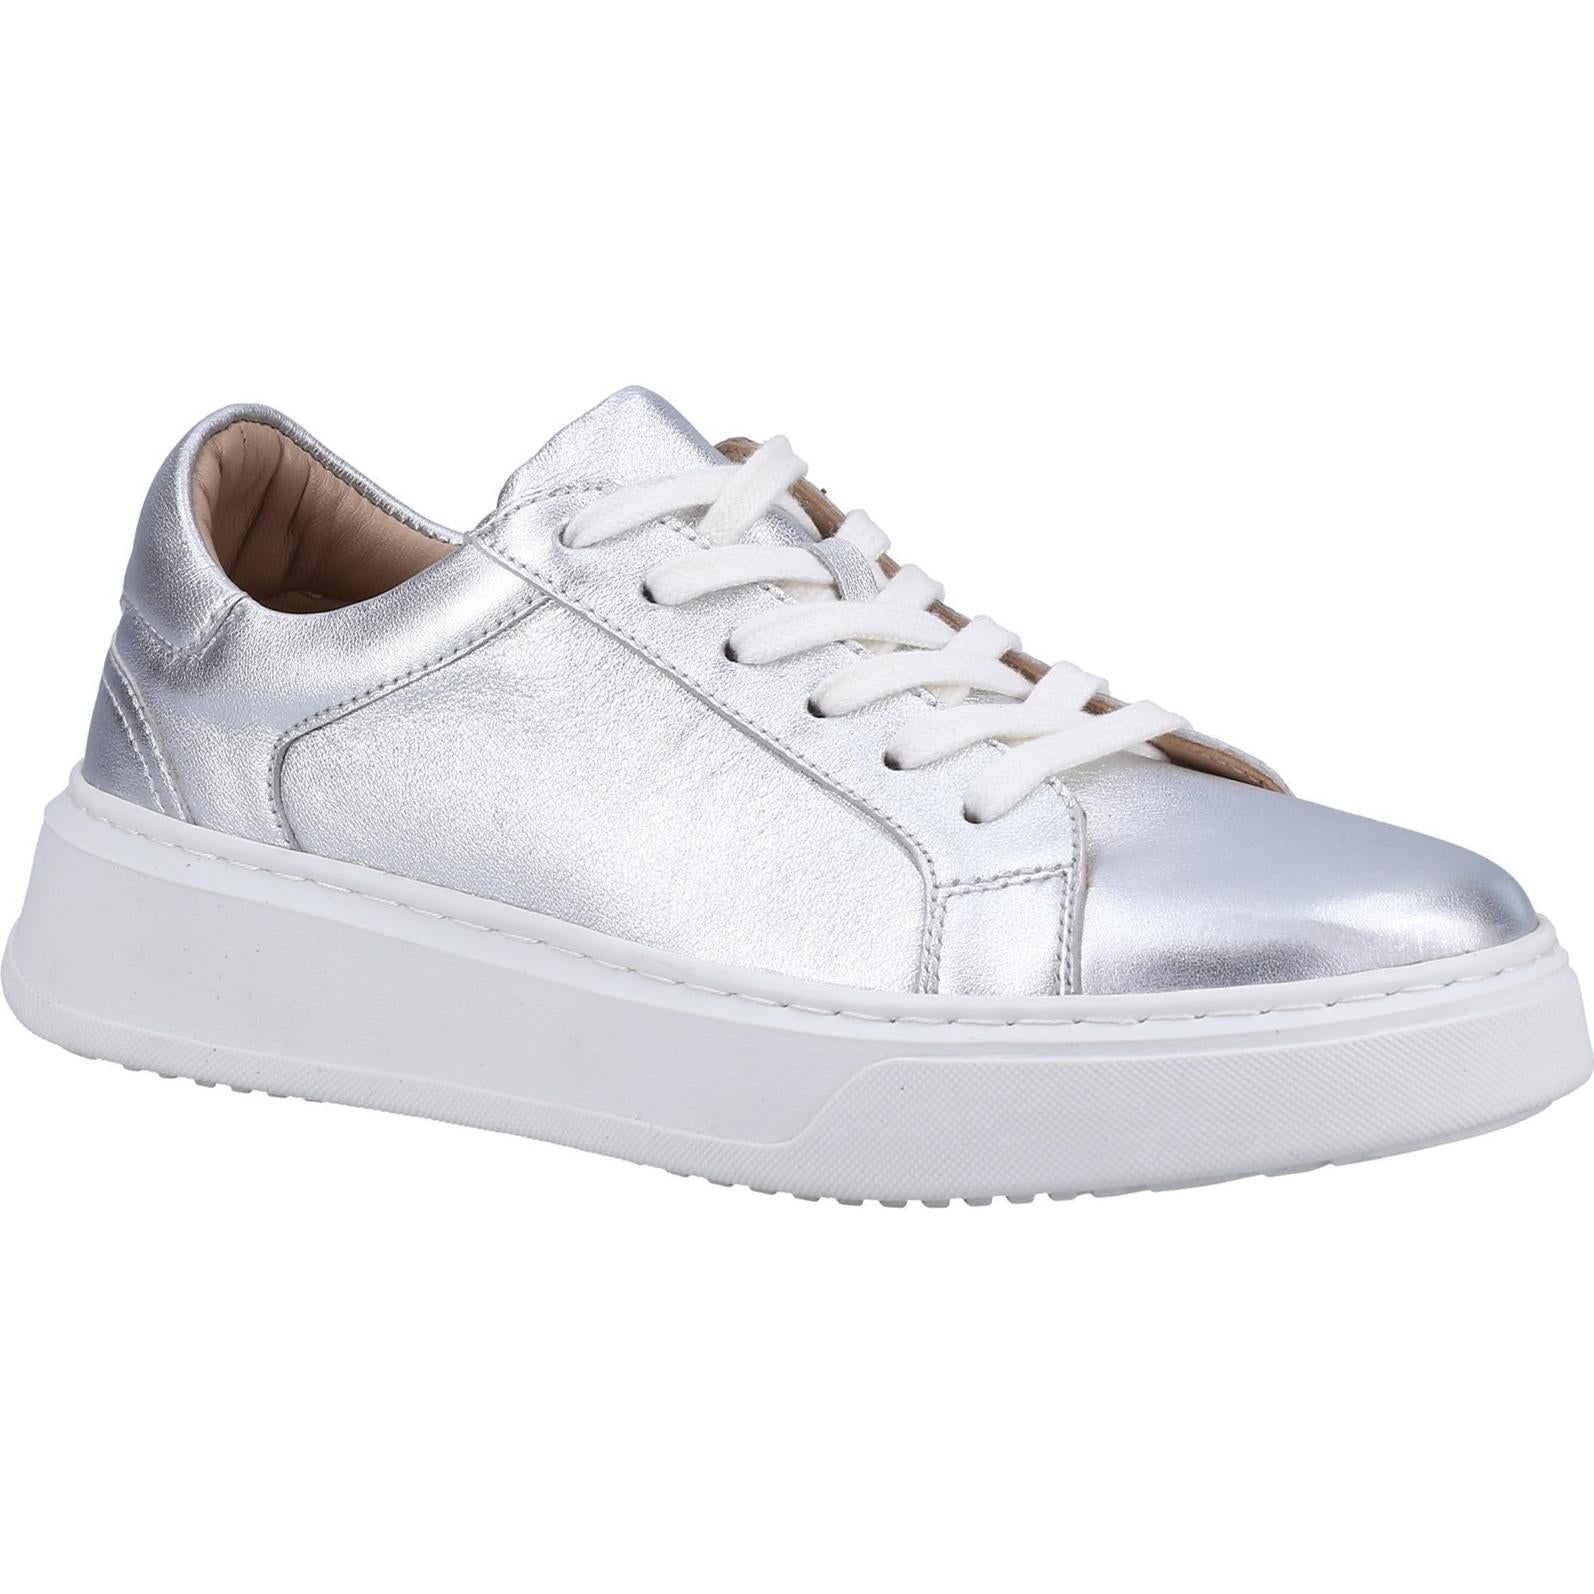 Hush Puppies Camille Lace Cupsole Trainers